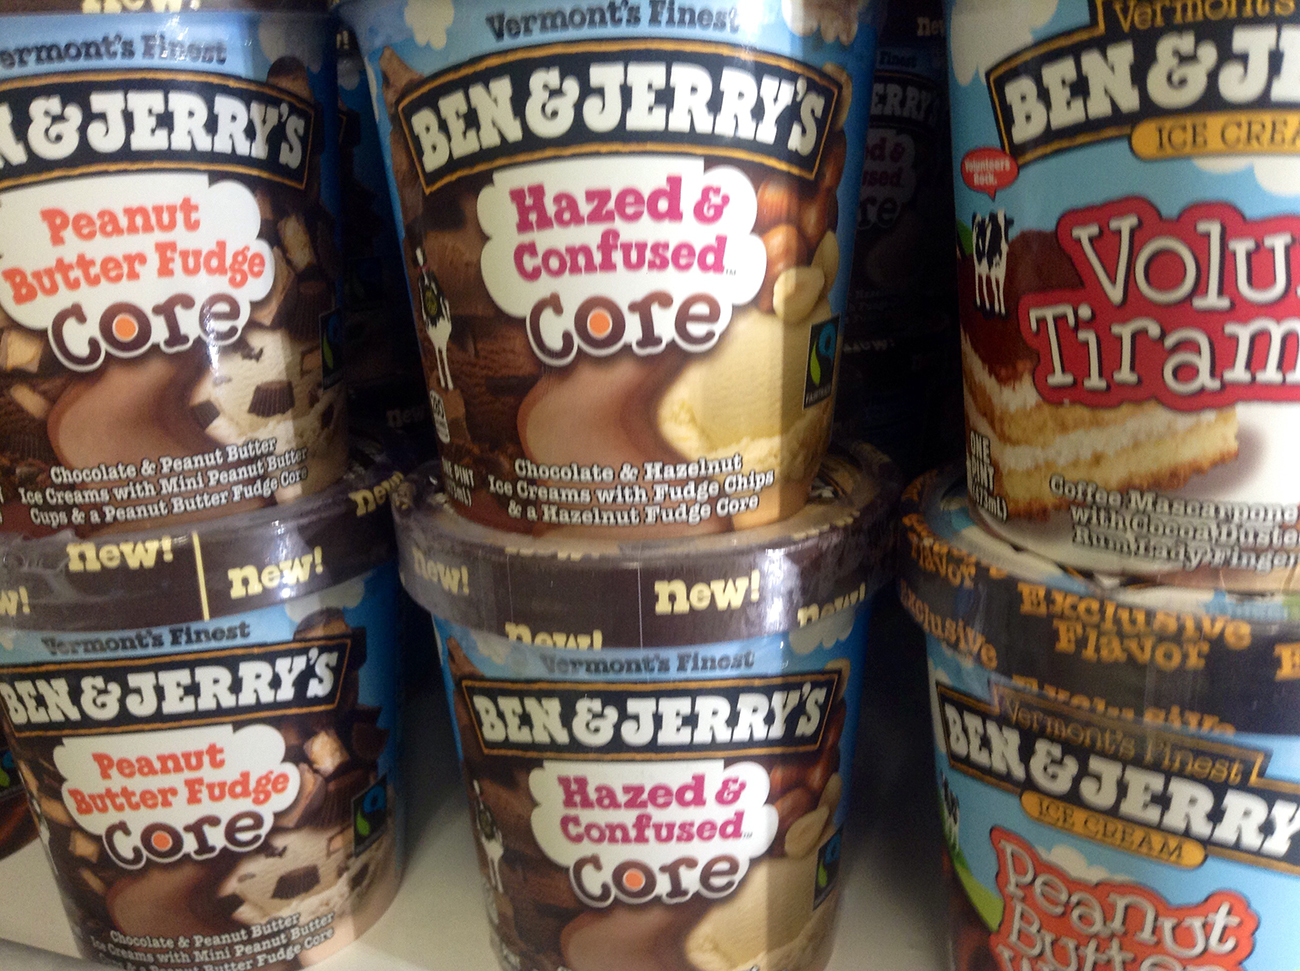 A photograph shows stacks of Ben and Jerry's ice cream pints.